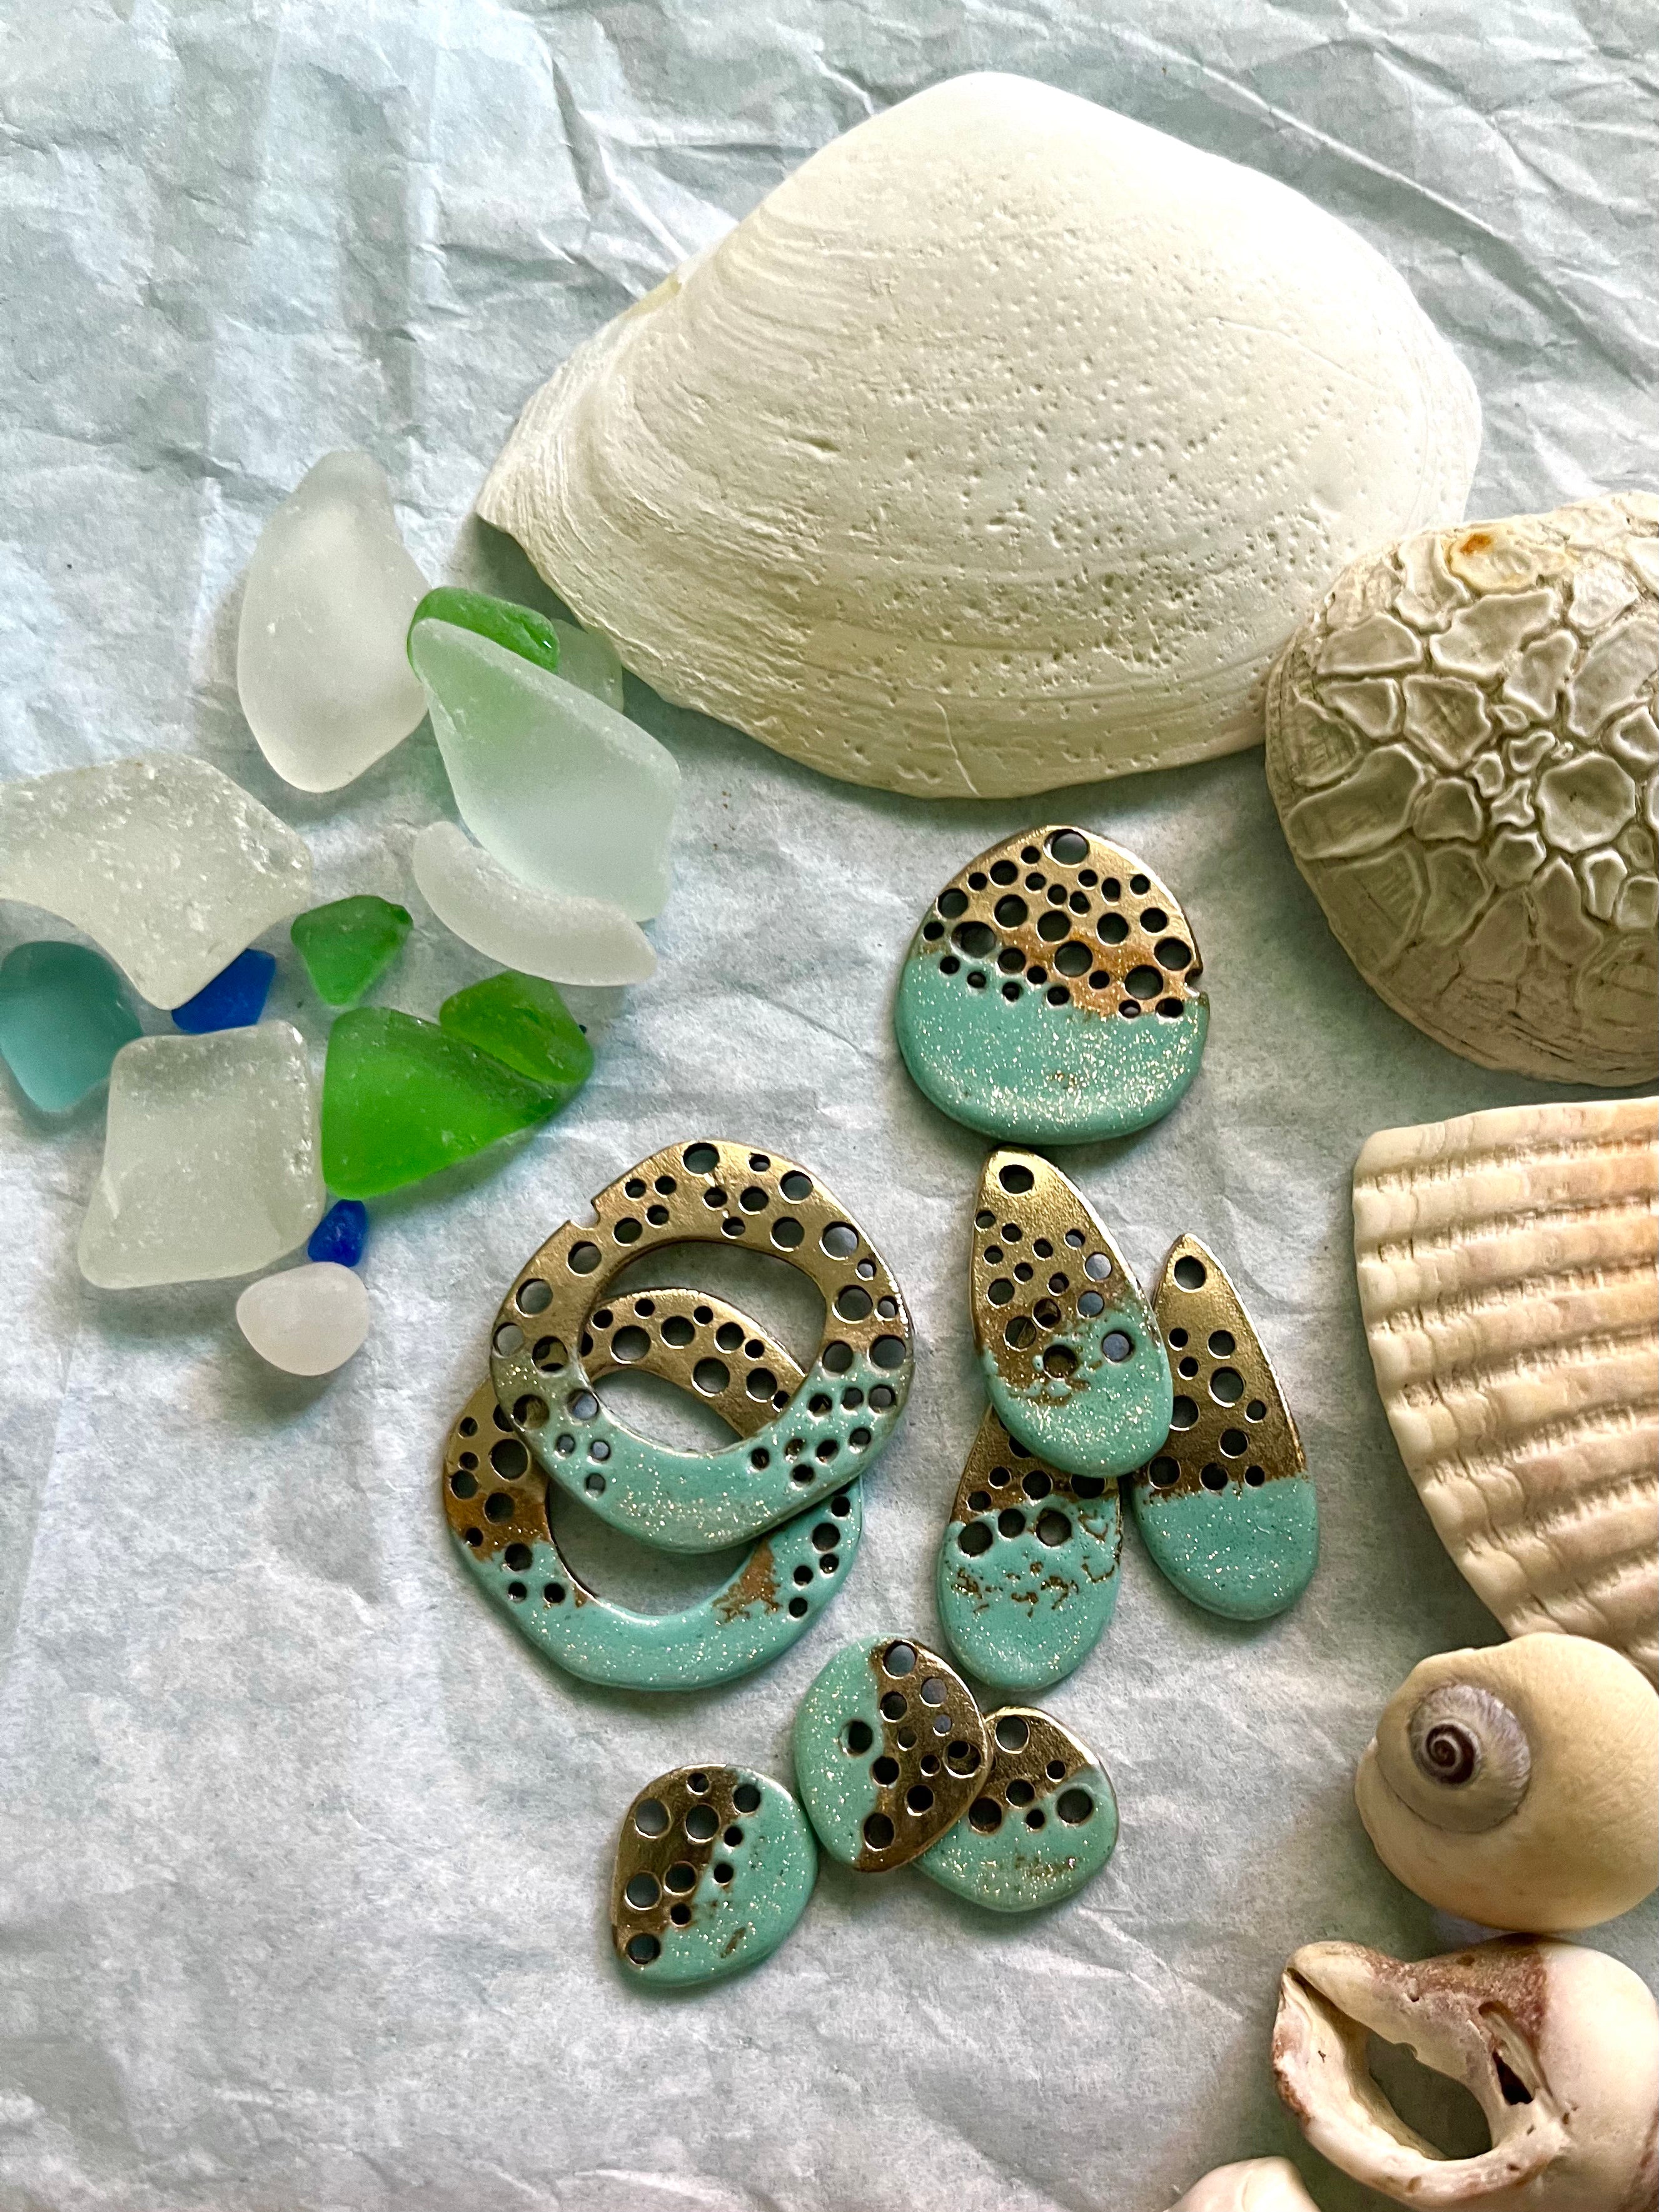 Seafoam green bronze jewelry pieces with seashells and glass